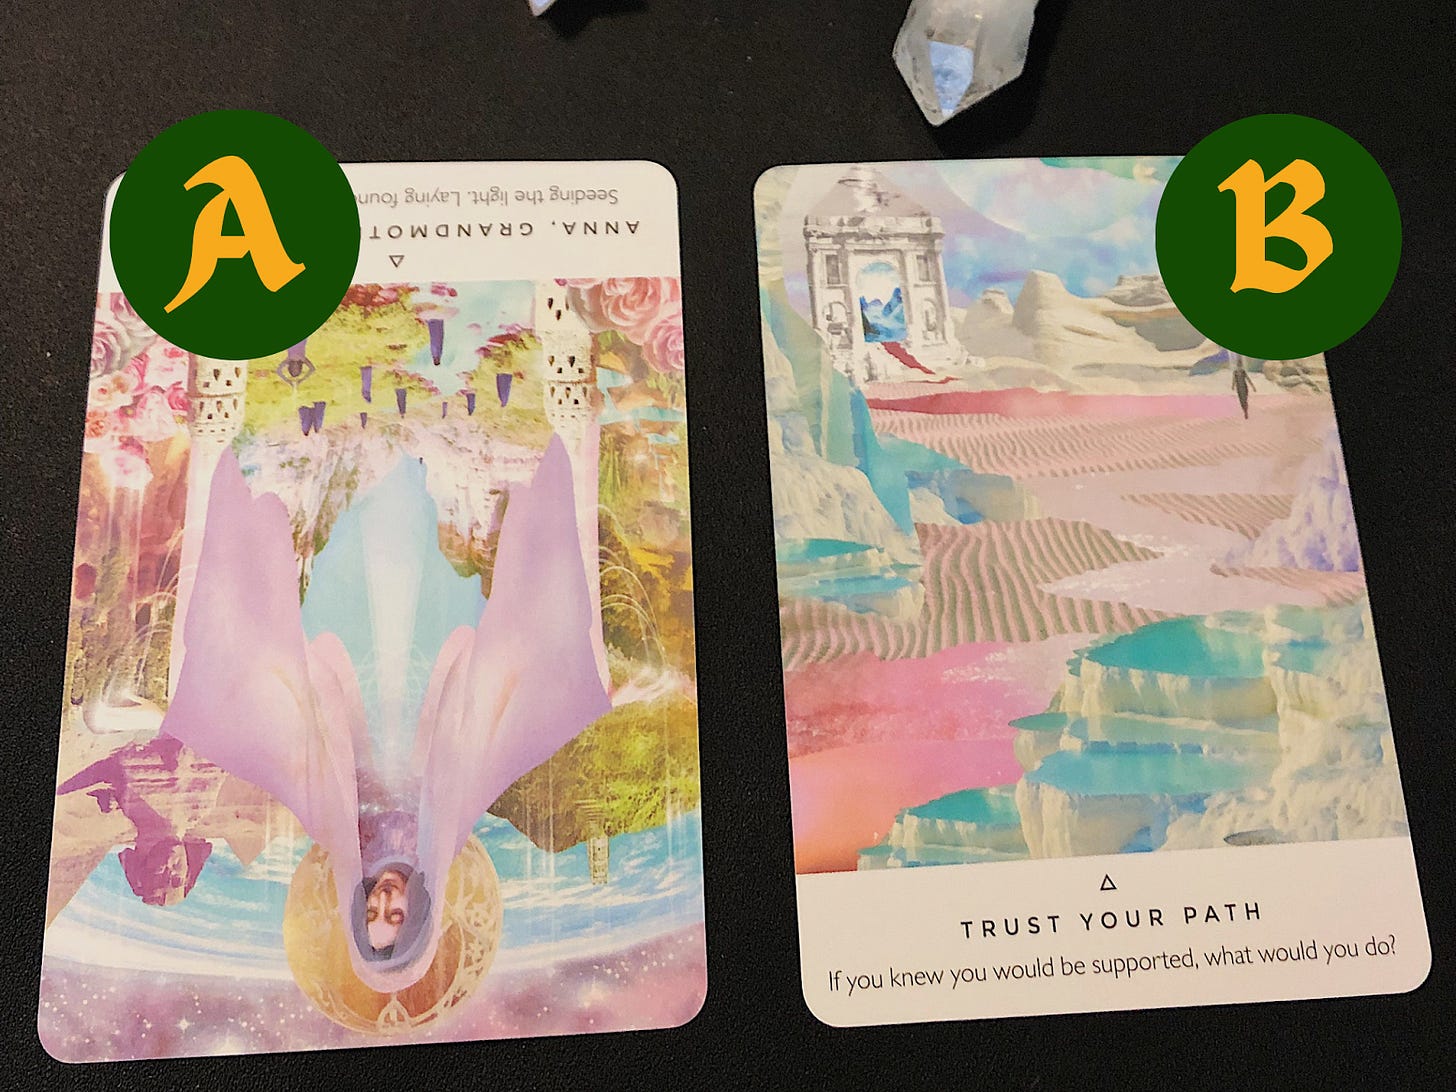 An unpsidedown Anna, Grandmother of Jesus oracle card on the left, and a Trust Your Path oracle card on the right.